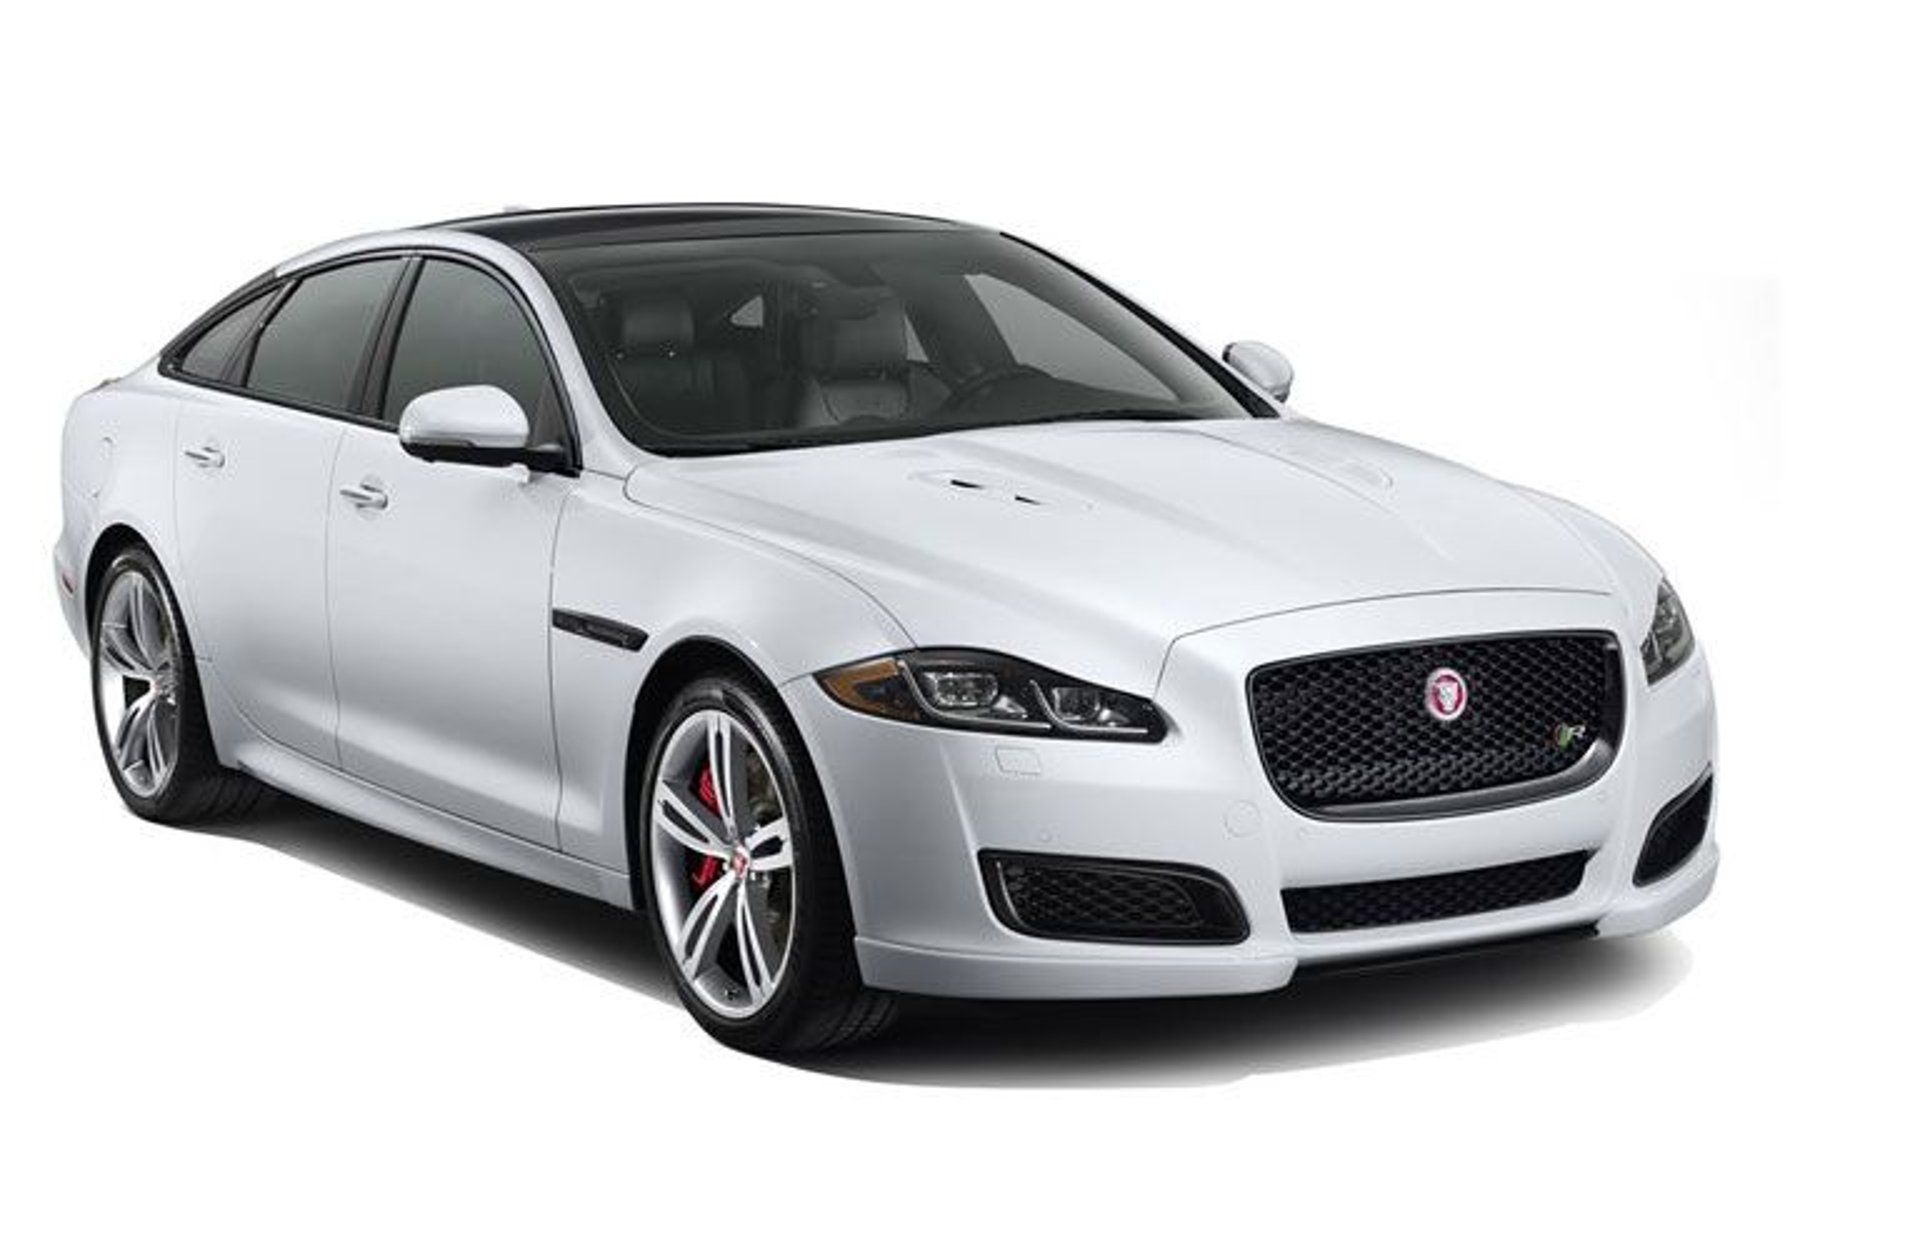 A Jaguar Vehicle for Every Lifestyle